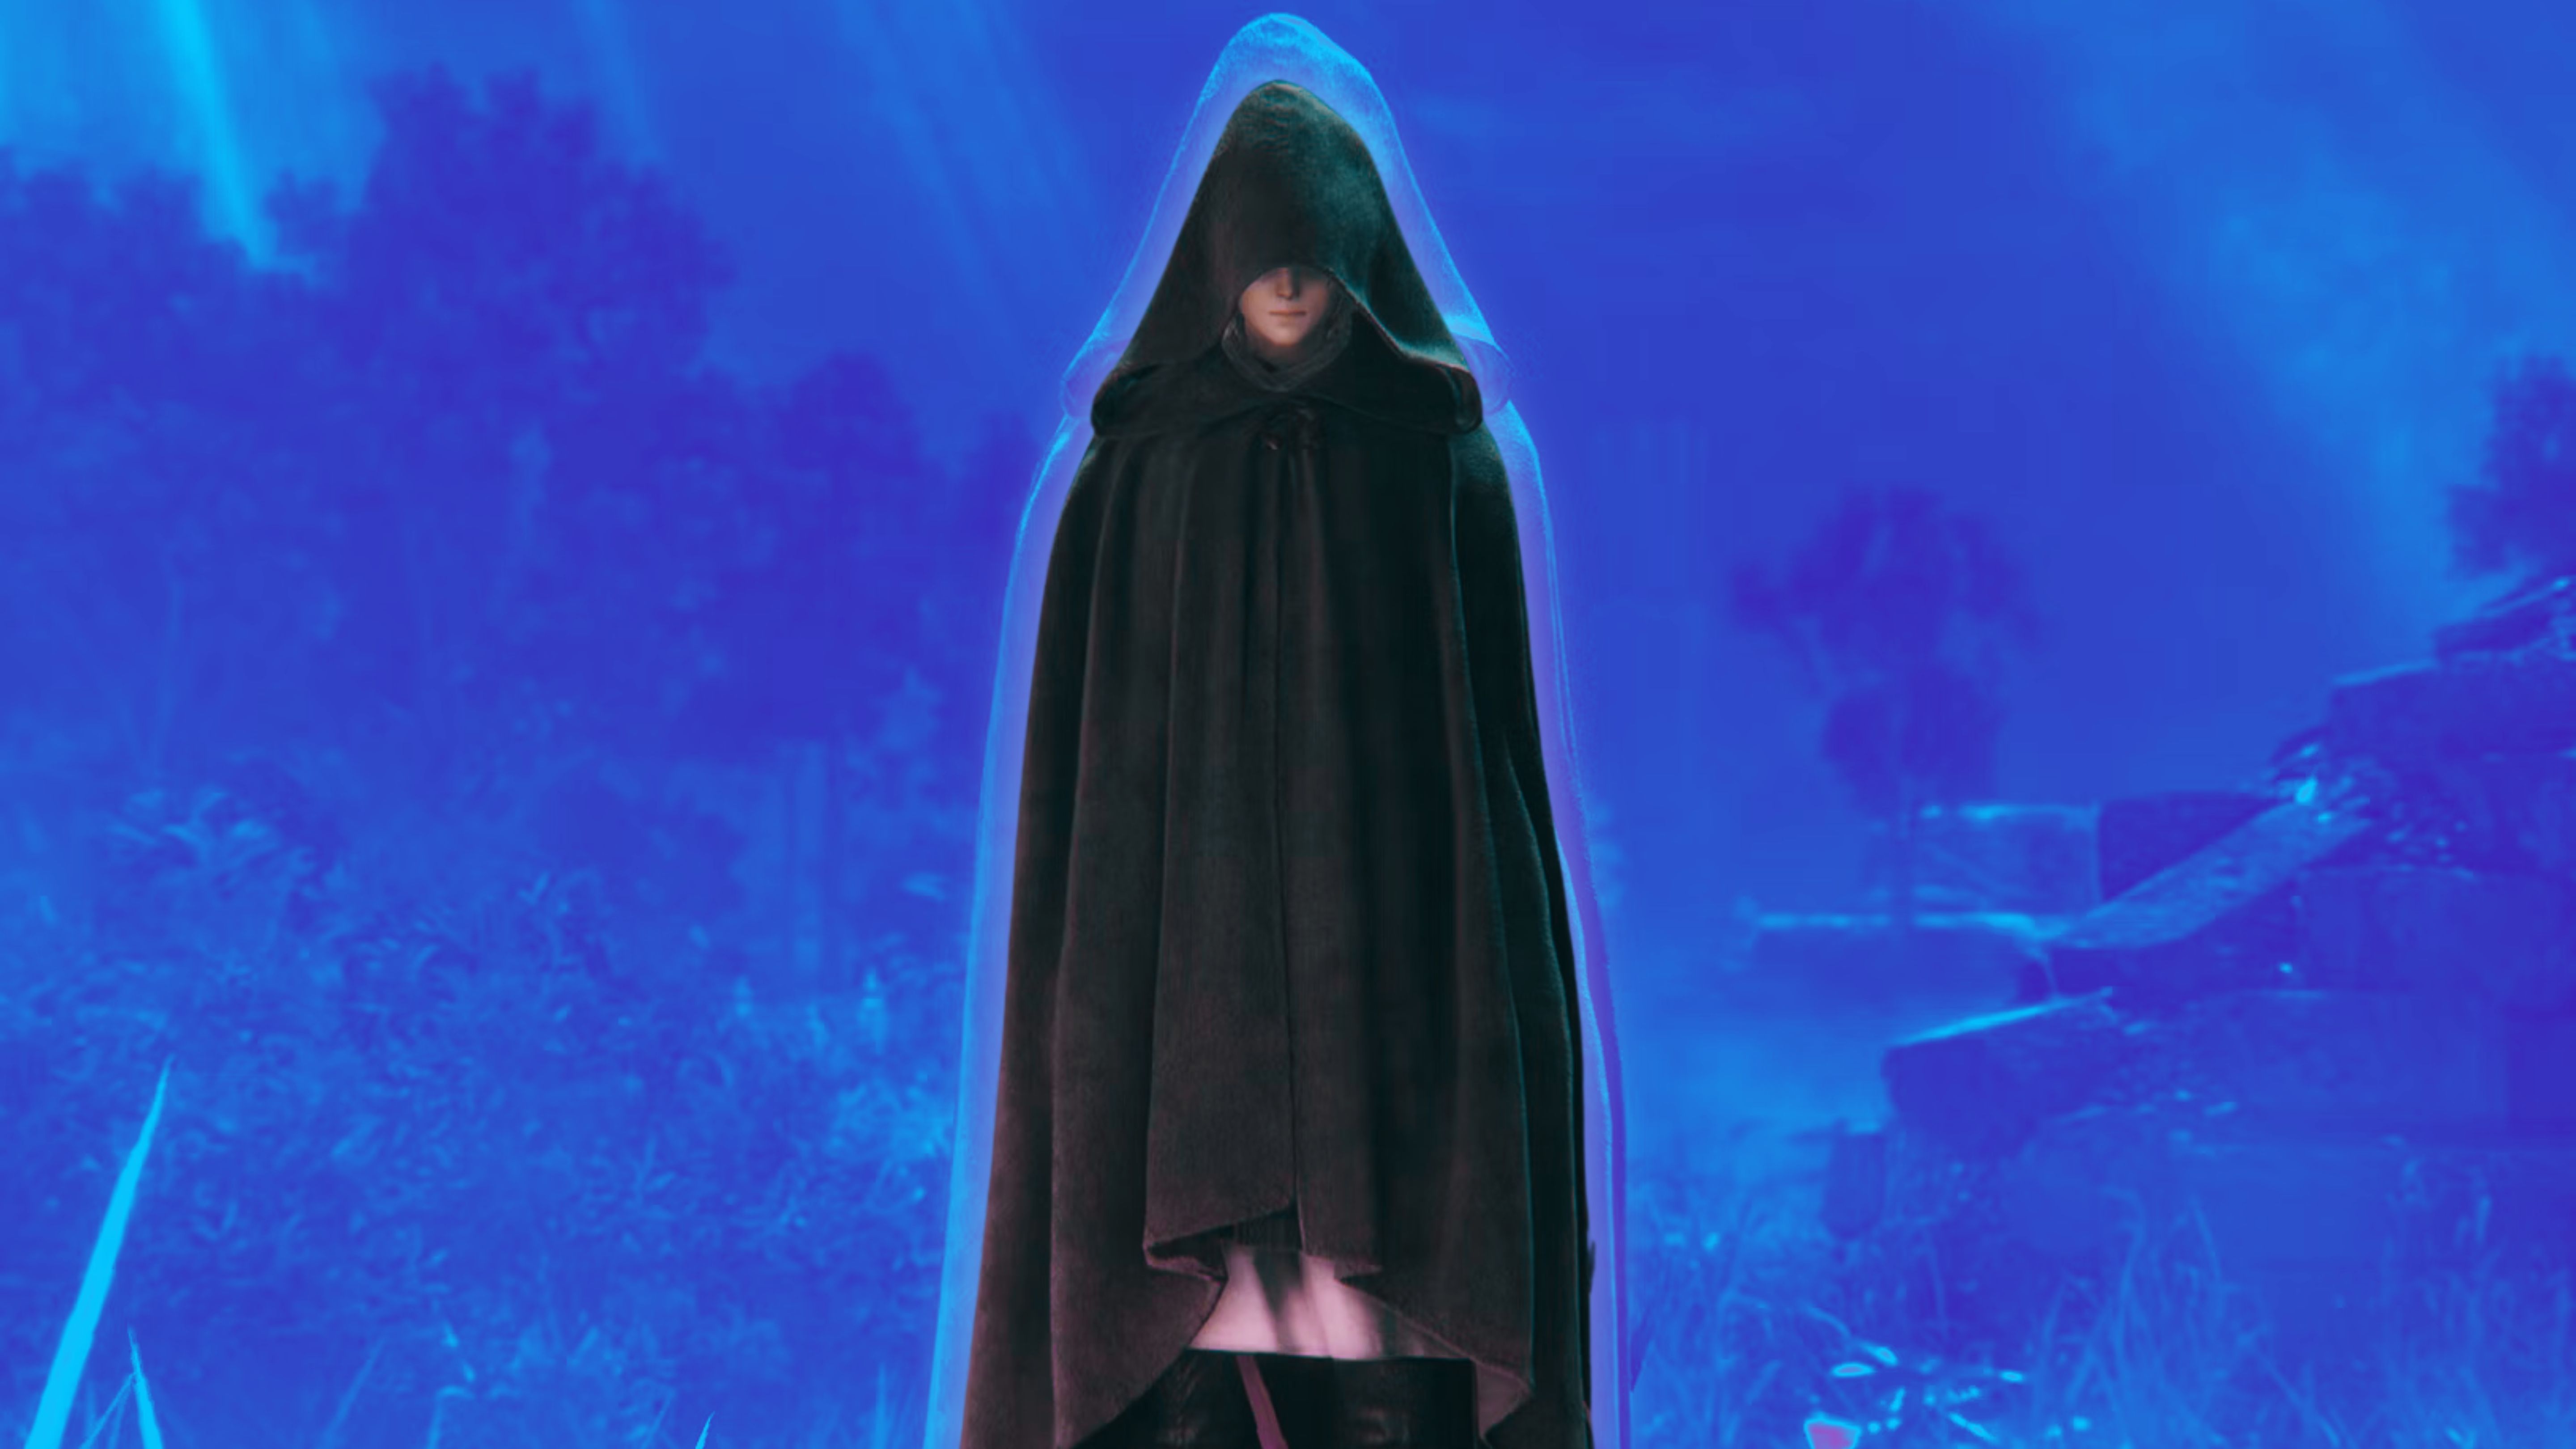 Elden Ring character with a dark cloak on.